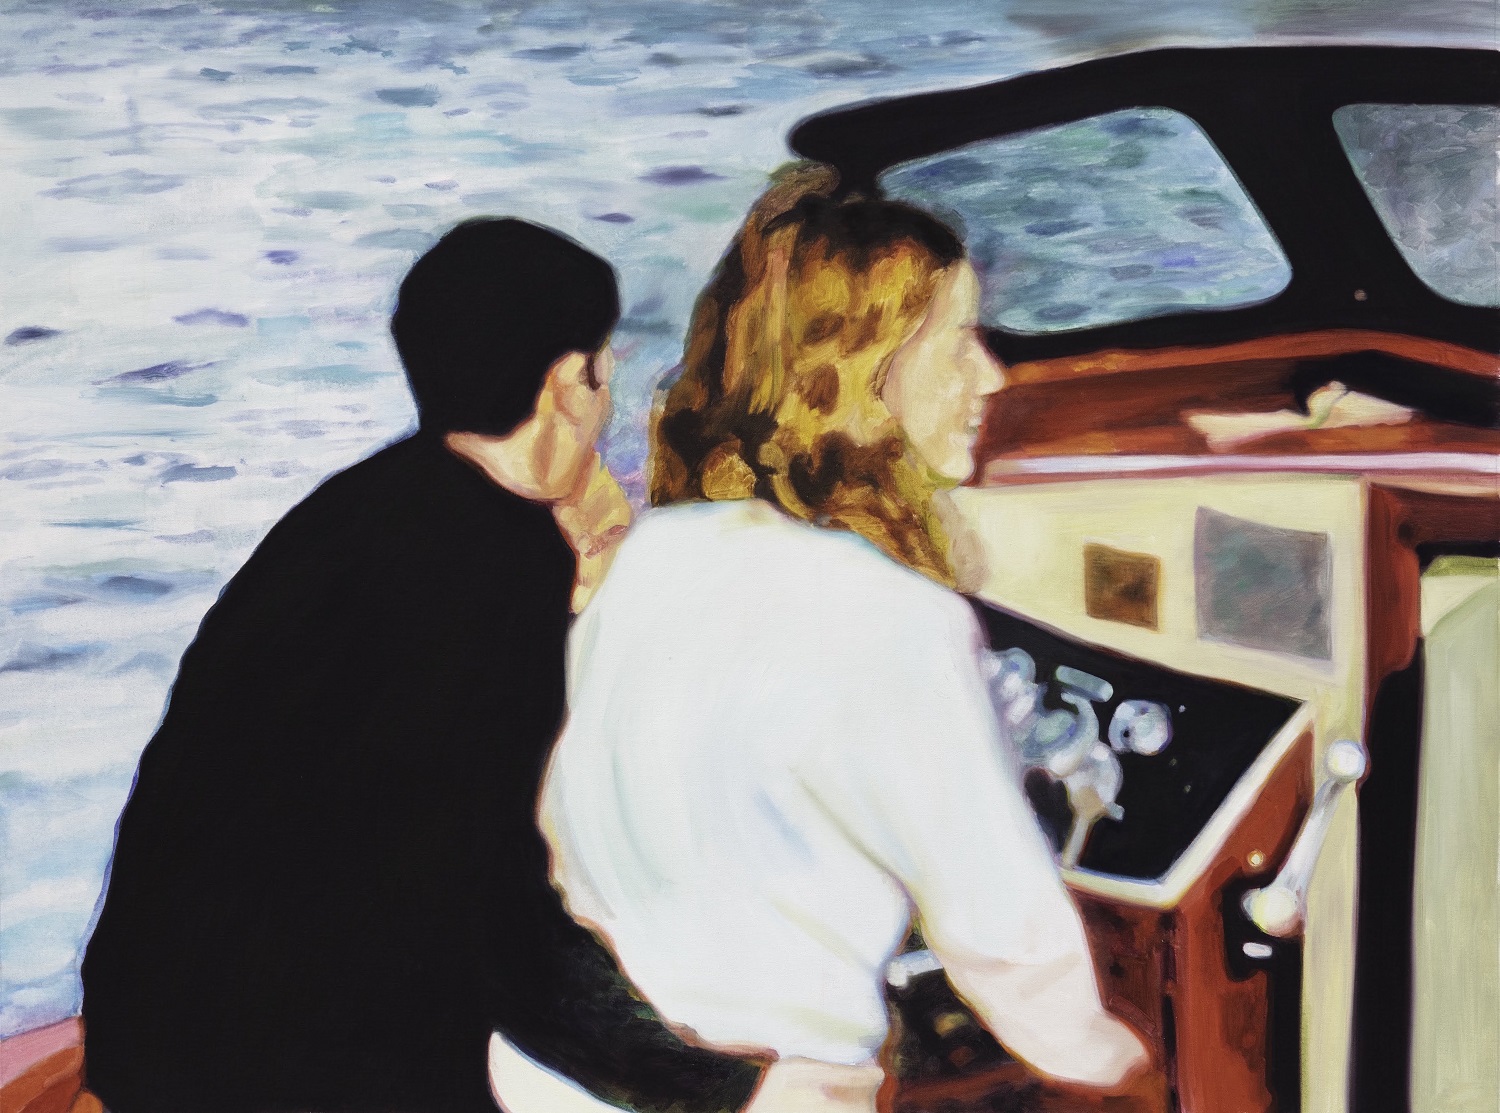 painting by Holly Keogh - two people in a boat